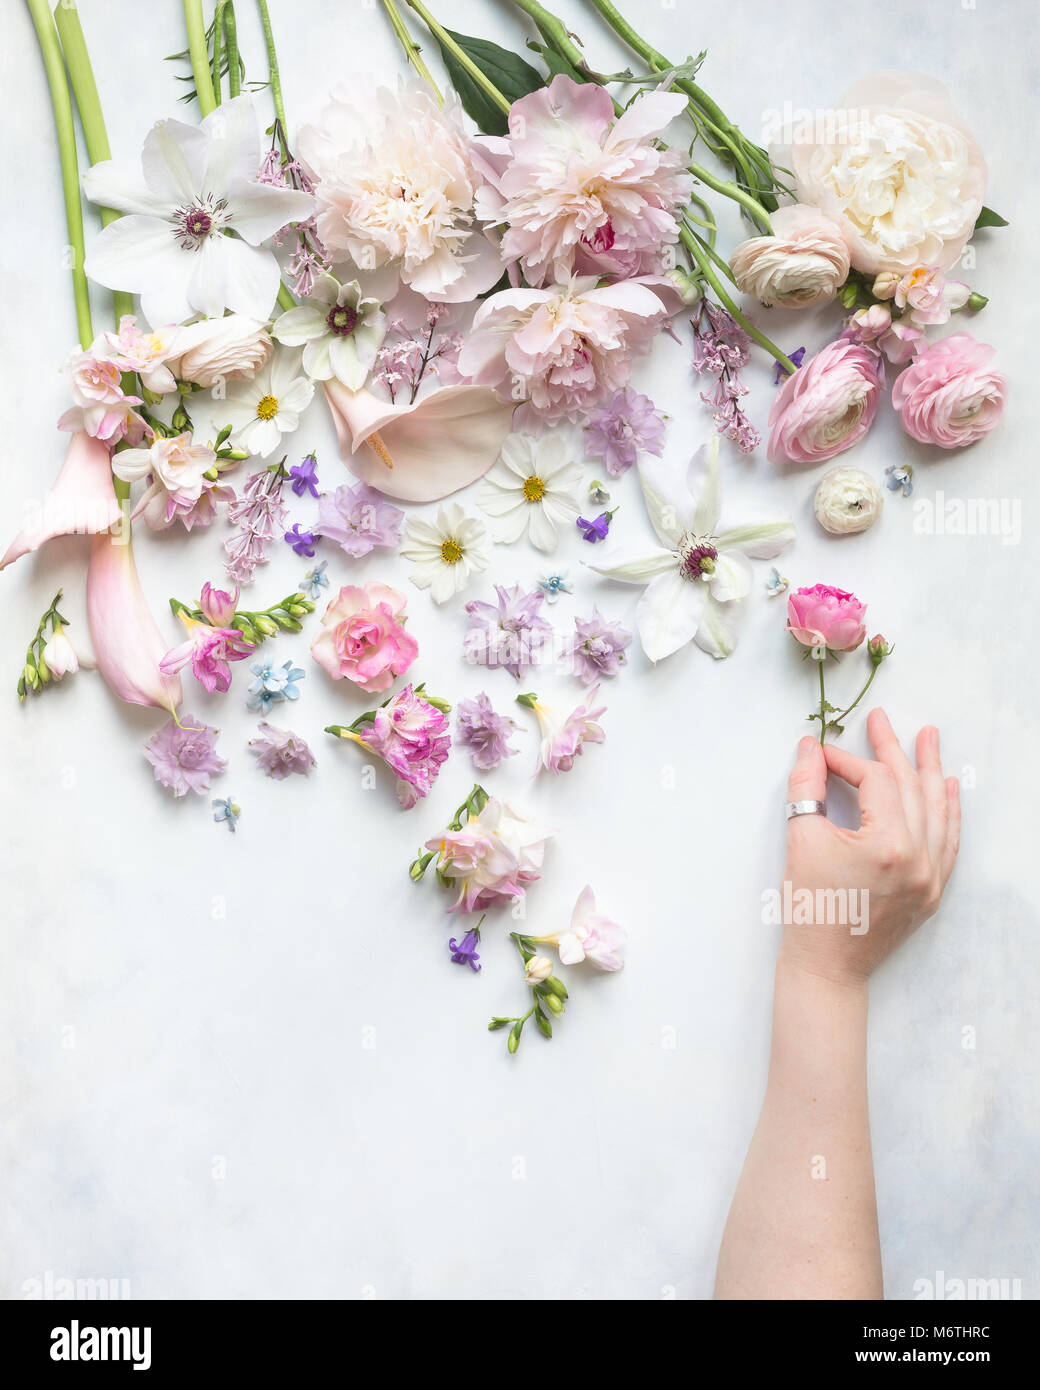 freesia, peonies, ranunculi, roses, cosmos, calla lilies, clematis cut flowers on a white and pale grey background, view from above, with single hand Stock Photo